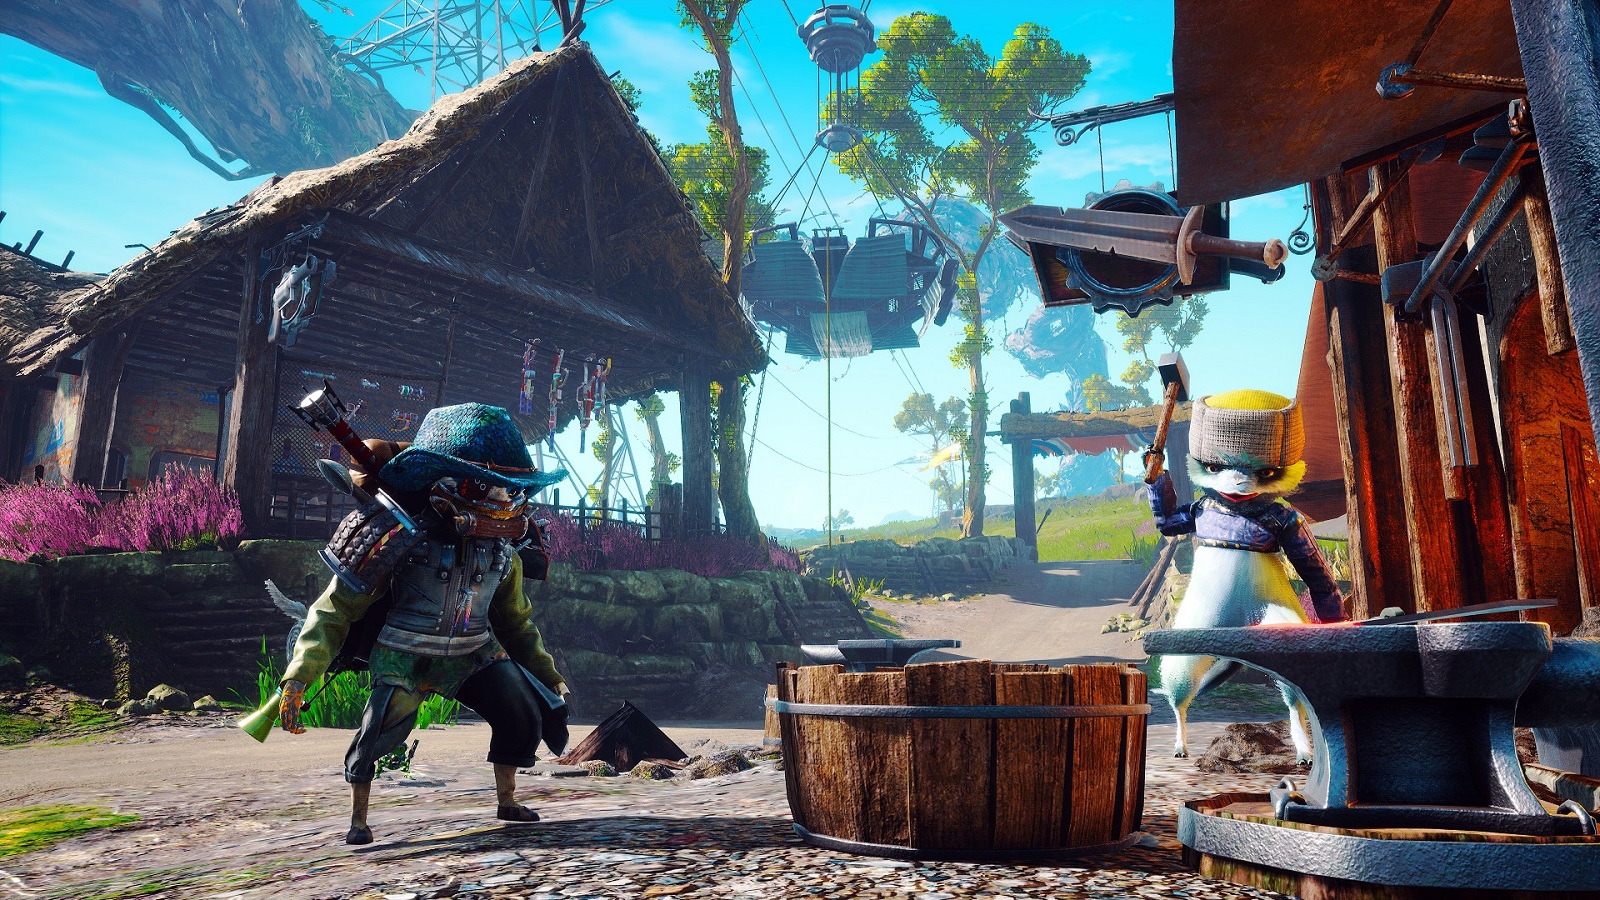 Is Biomutant available?